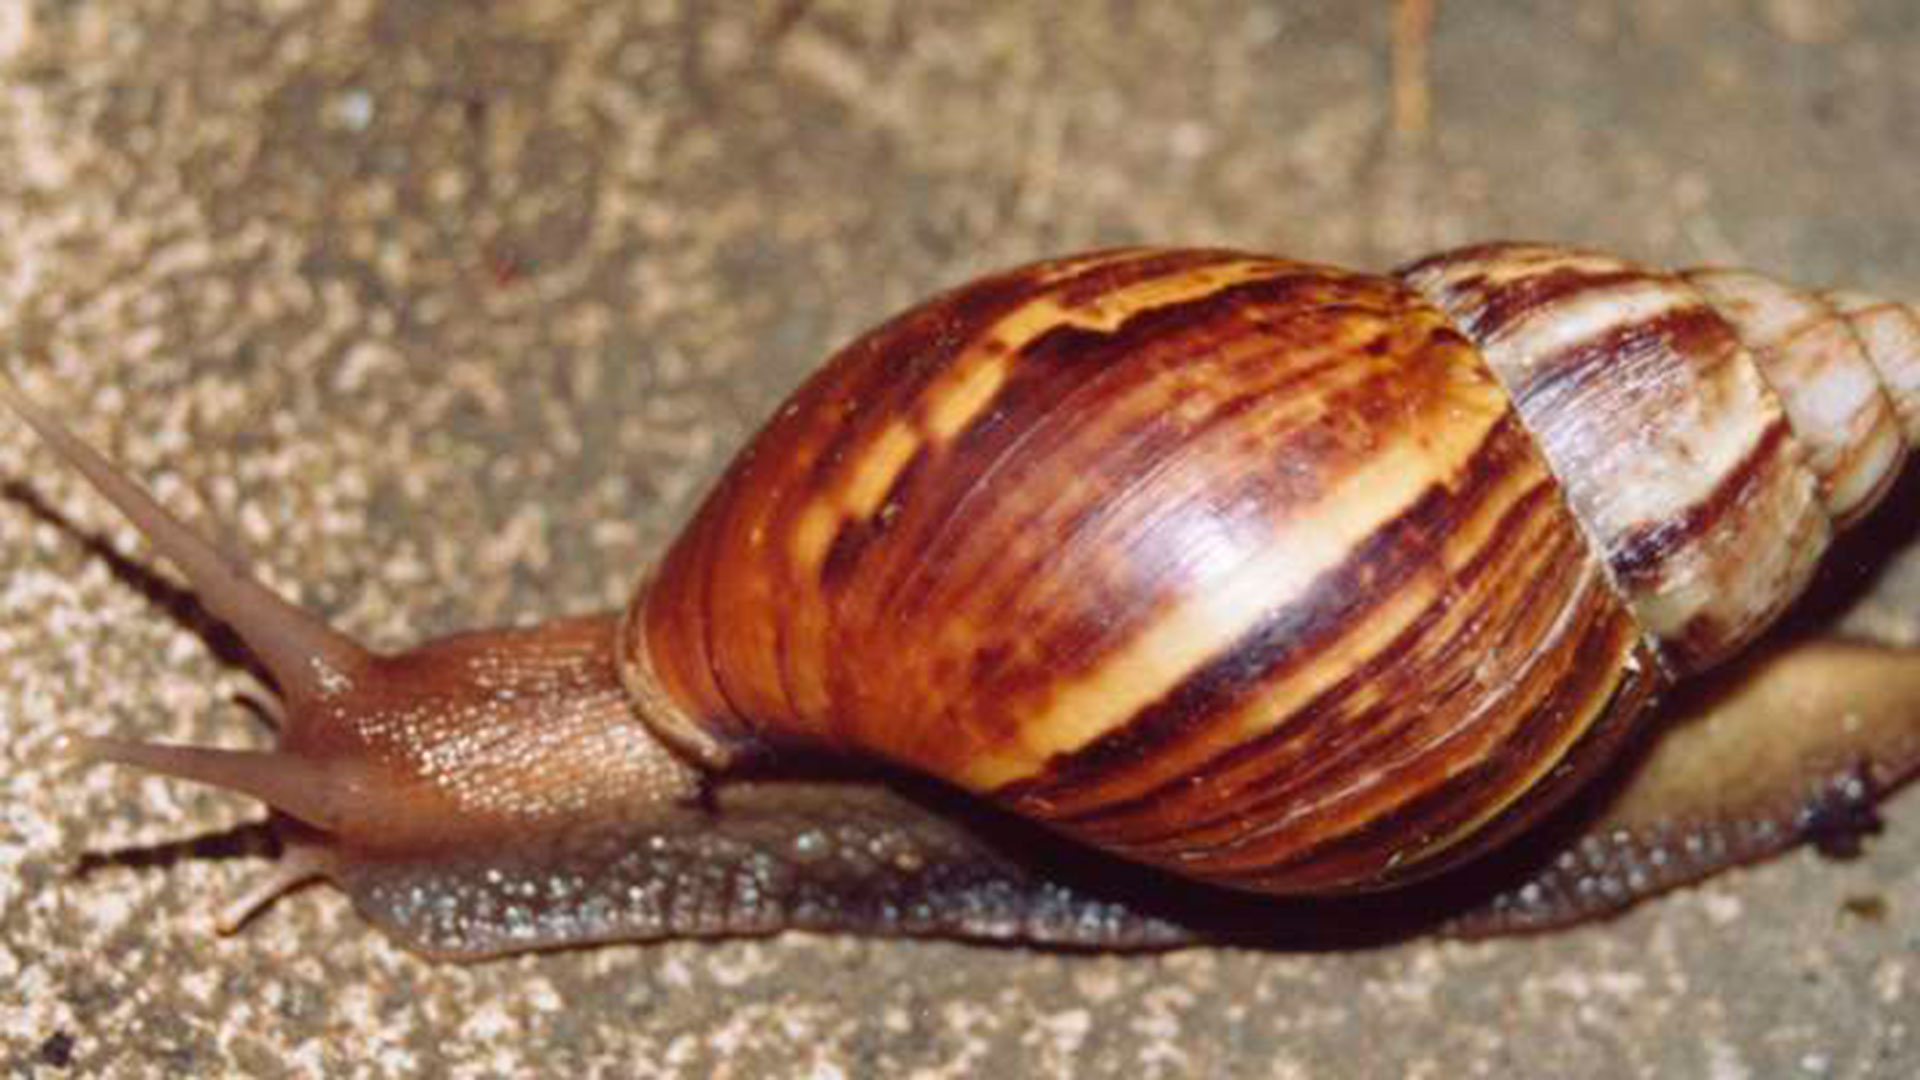 The giant African land snail has been exterminated twice in Florida